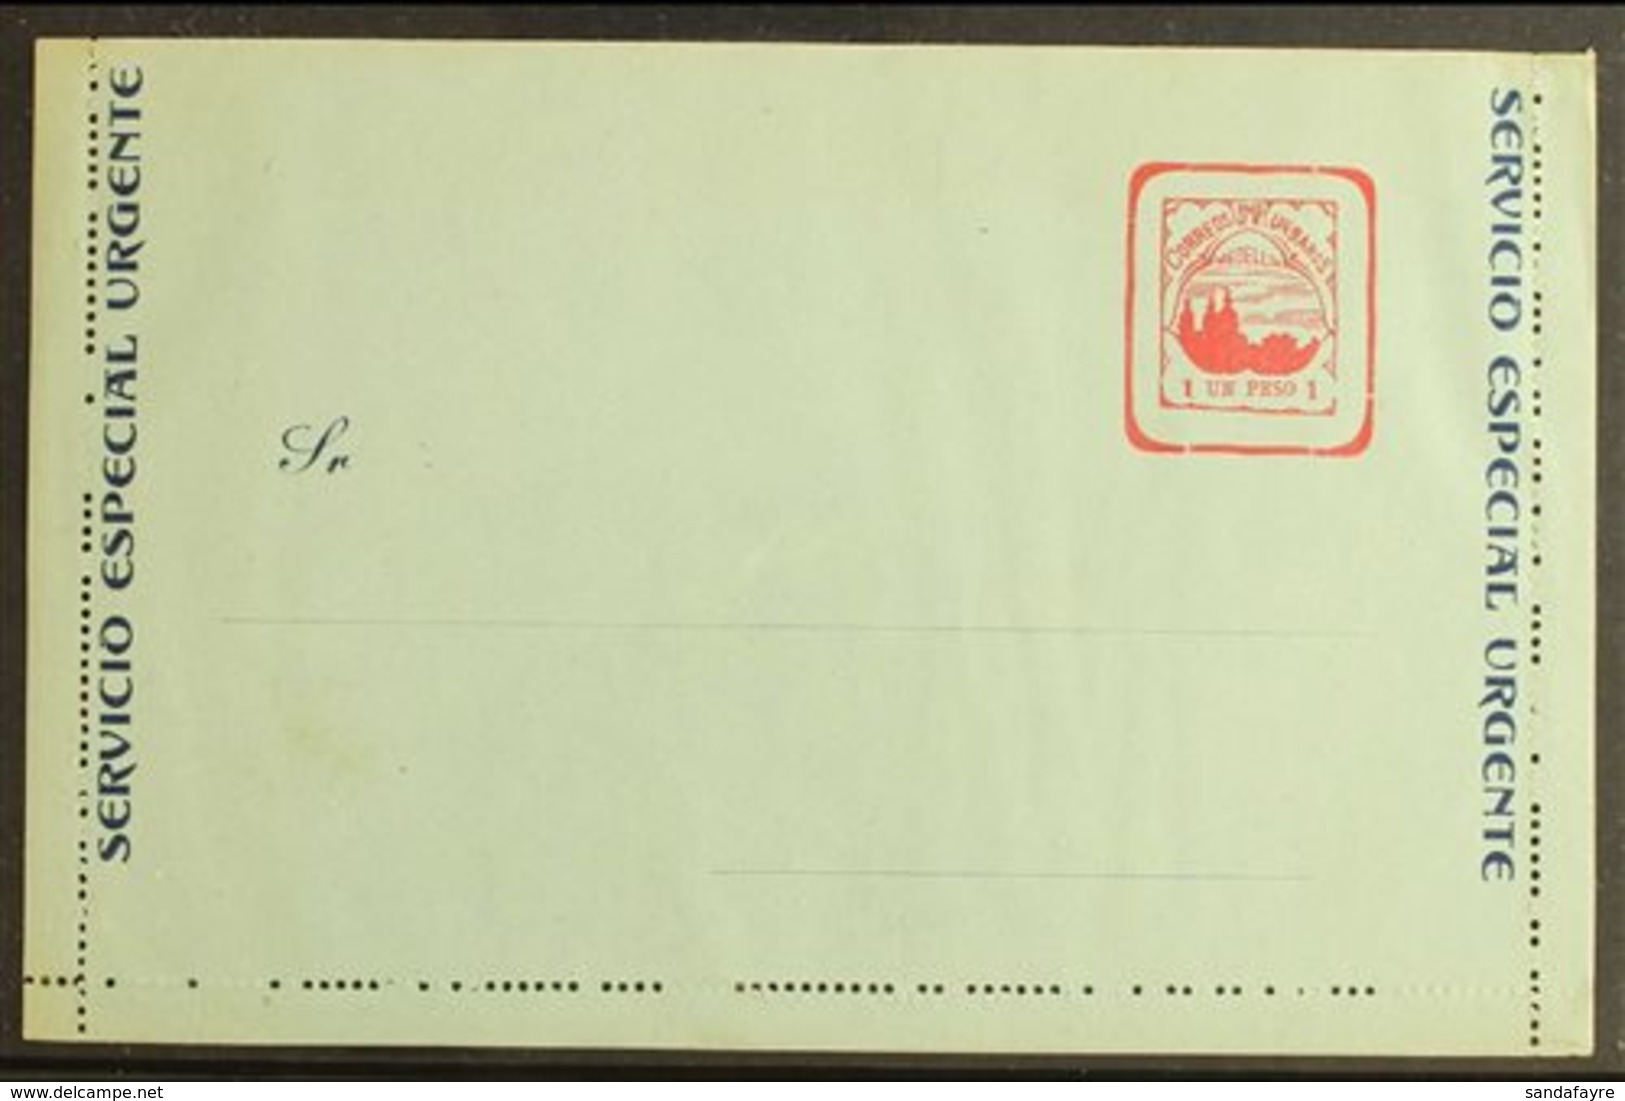 MEDELLIN - POSTAL STATIONERY  1904 Letter Card "Un Peso" Red On Light Green With Dark Blue Text, Higgins & Gage 1, Very  - Colombia